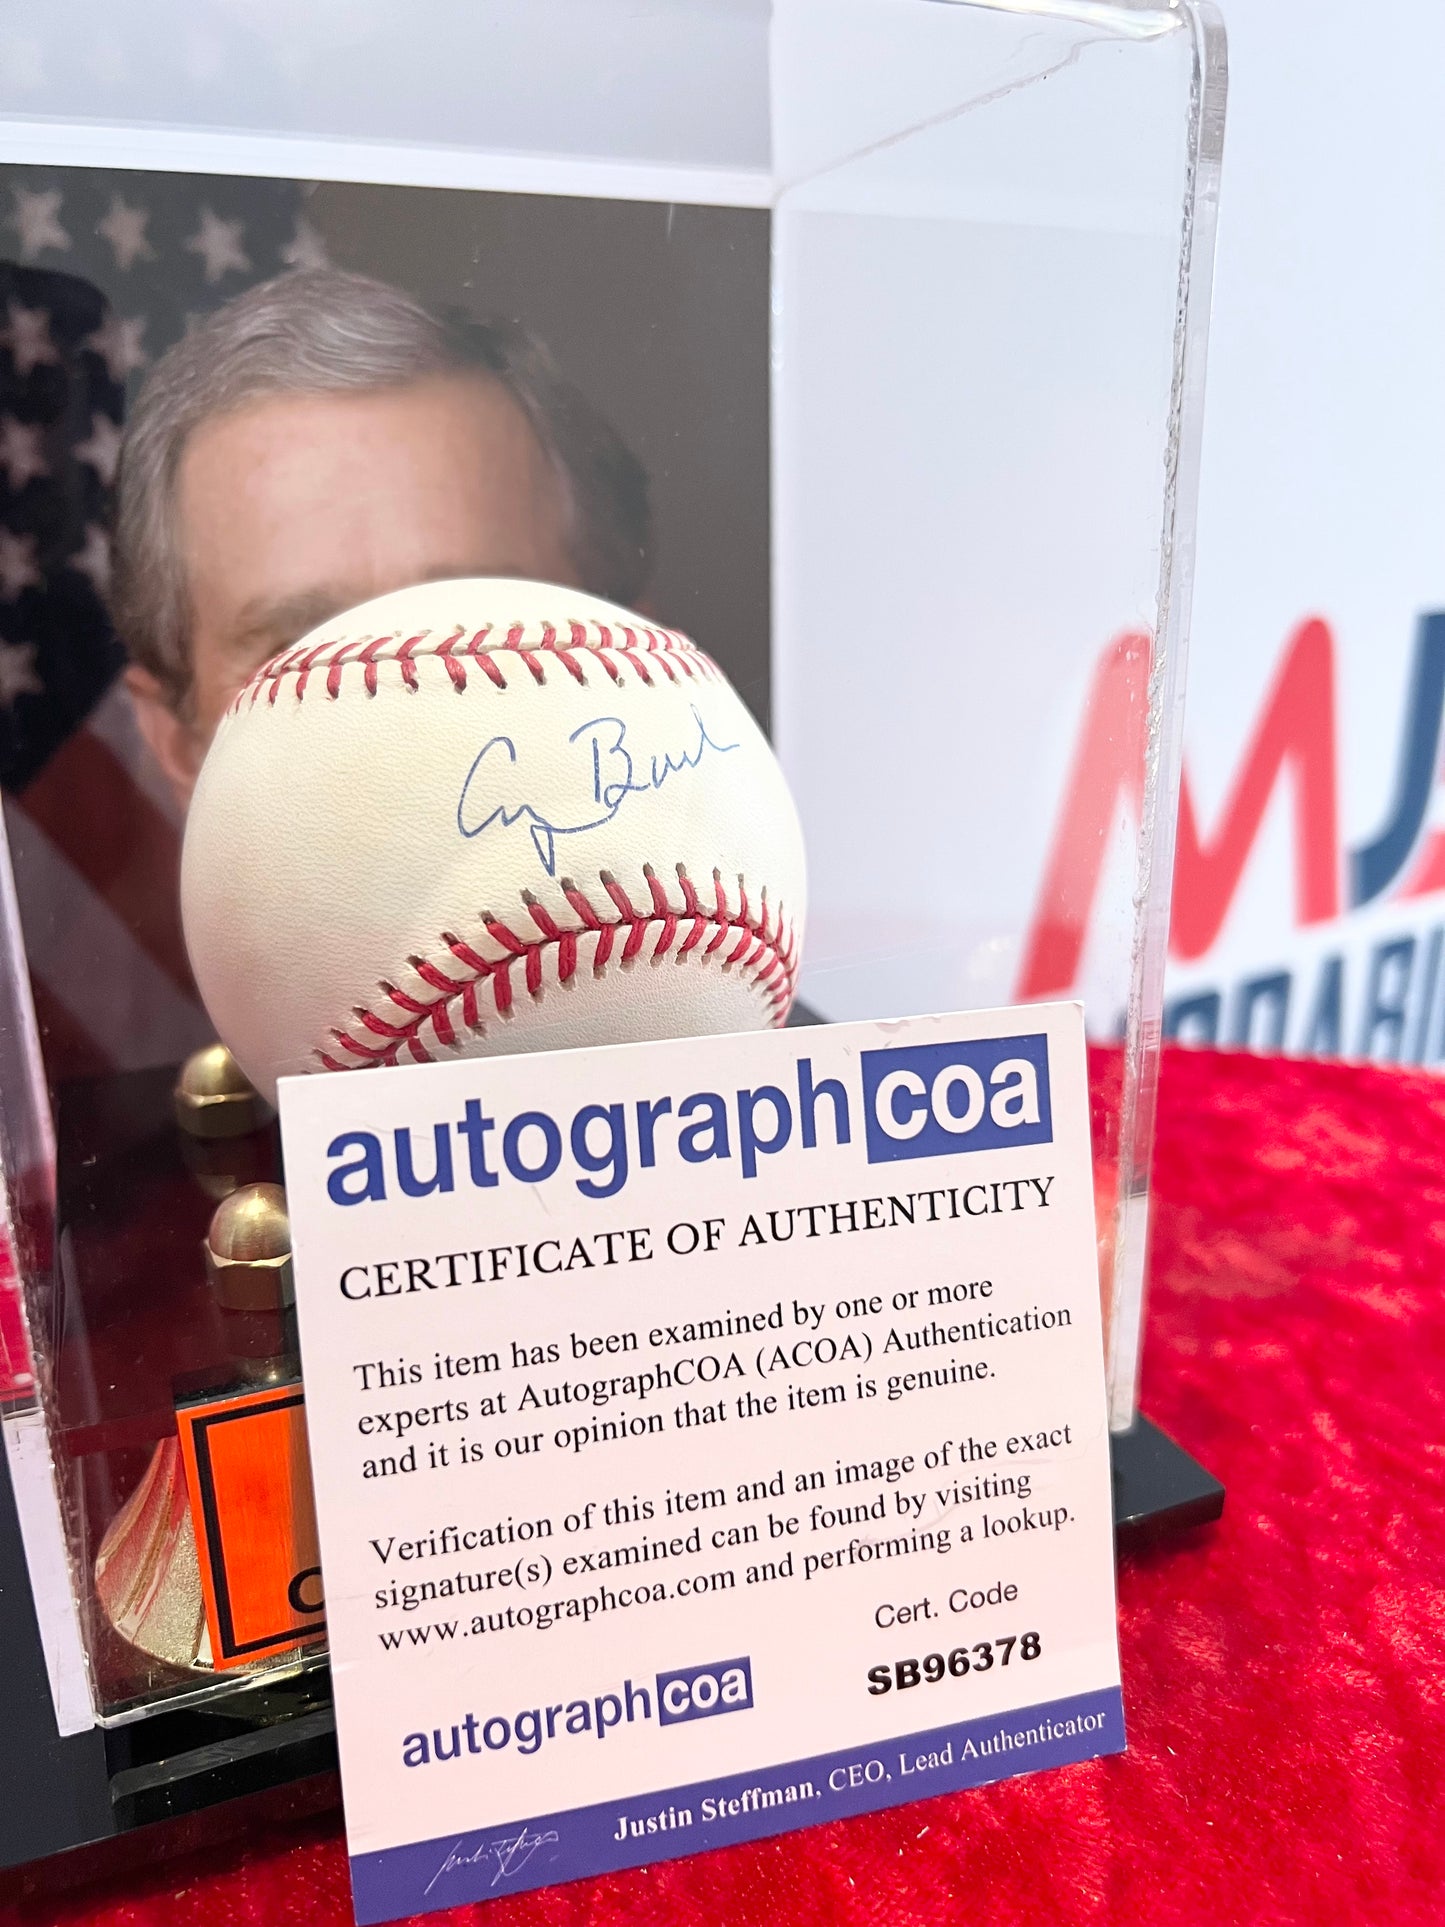 George W Bush Signed Official Rawlings Baseball Signed in 1997 RARE